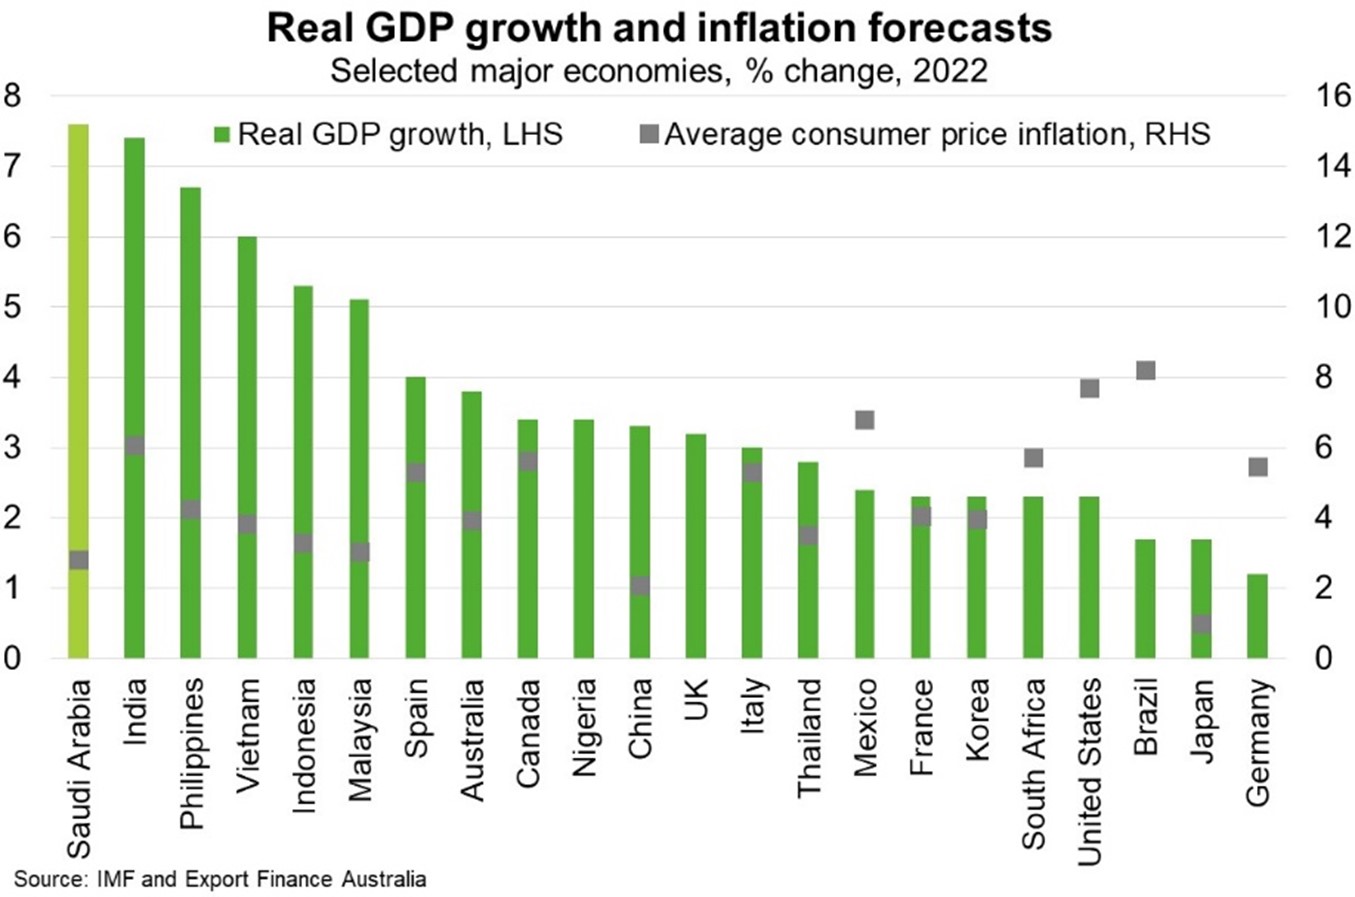 Real GDP growth and inflation forecasts for selected major economies 